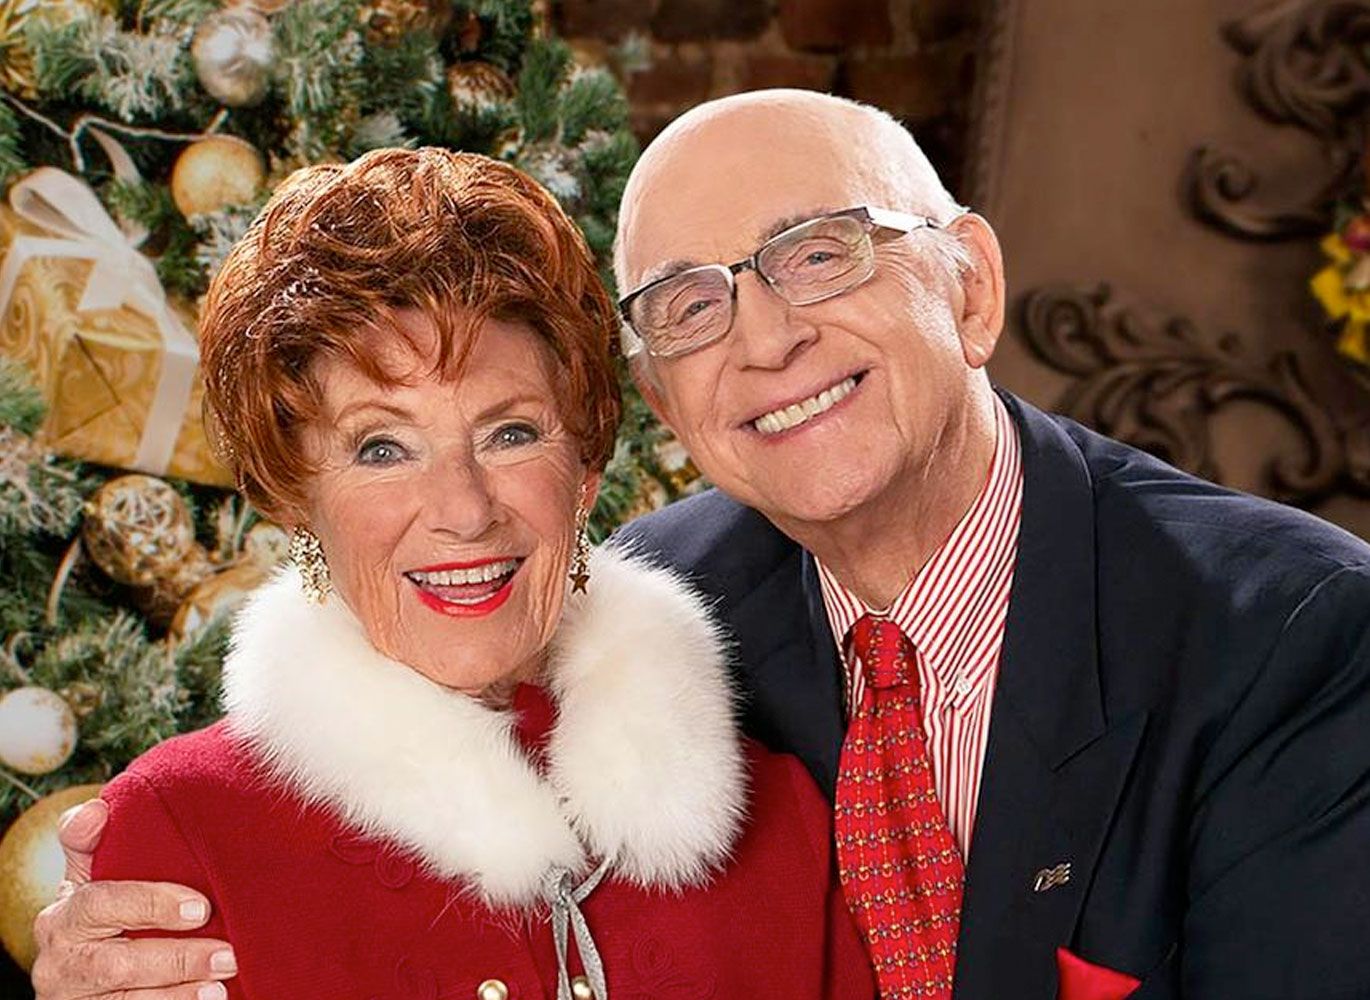 Hosts Gavin MacLeod (The Love Boat) and Marion Ross (Happy Days).